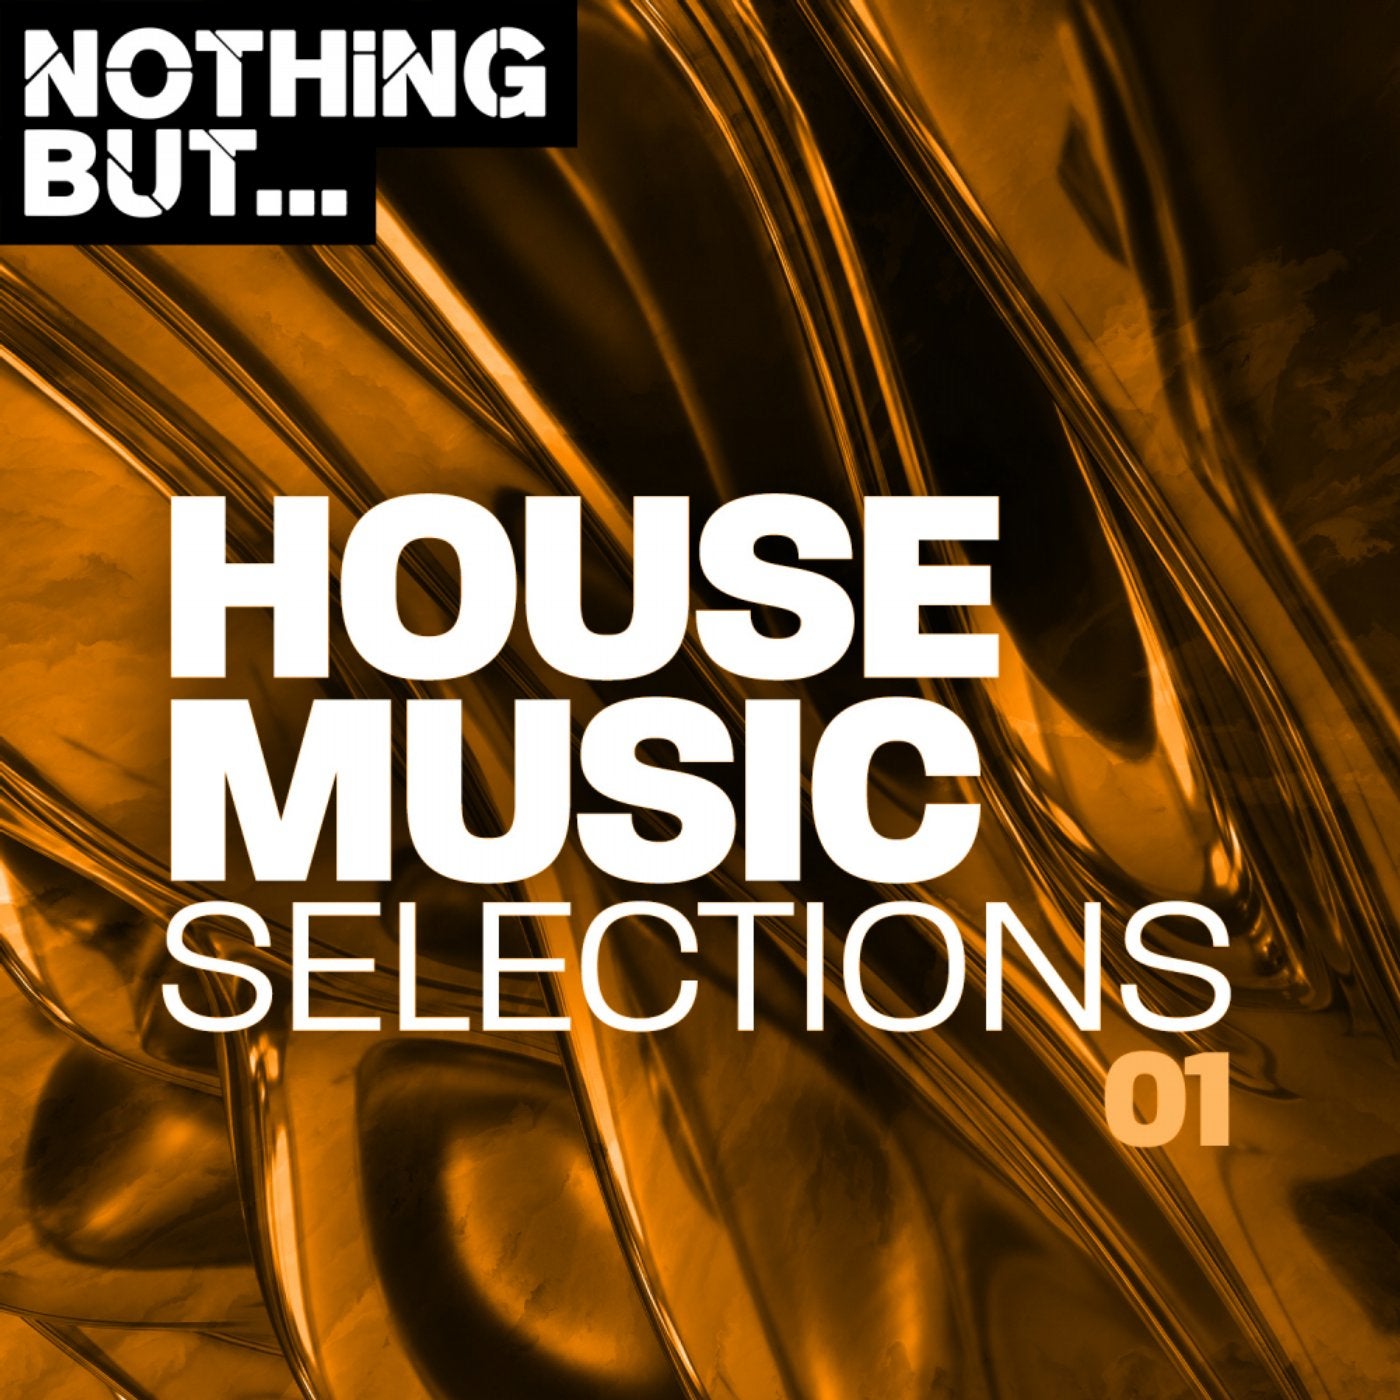 Nothing But... House Music Selections, Vol. 01